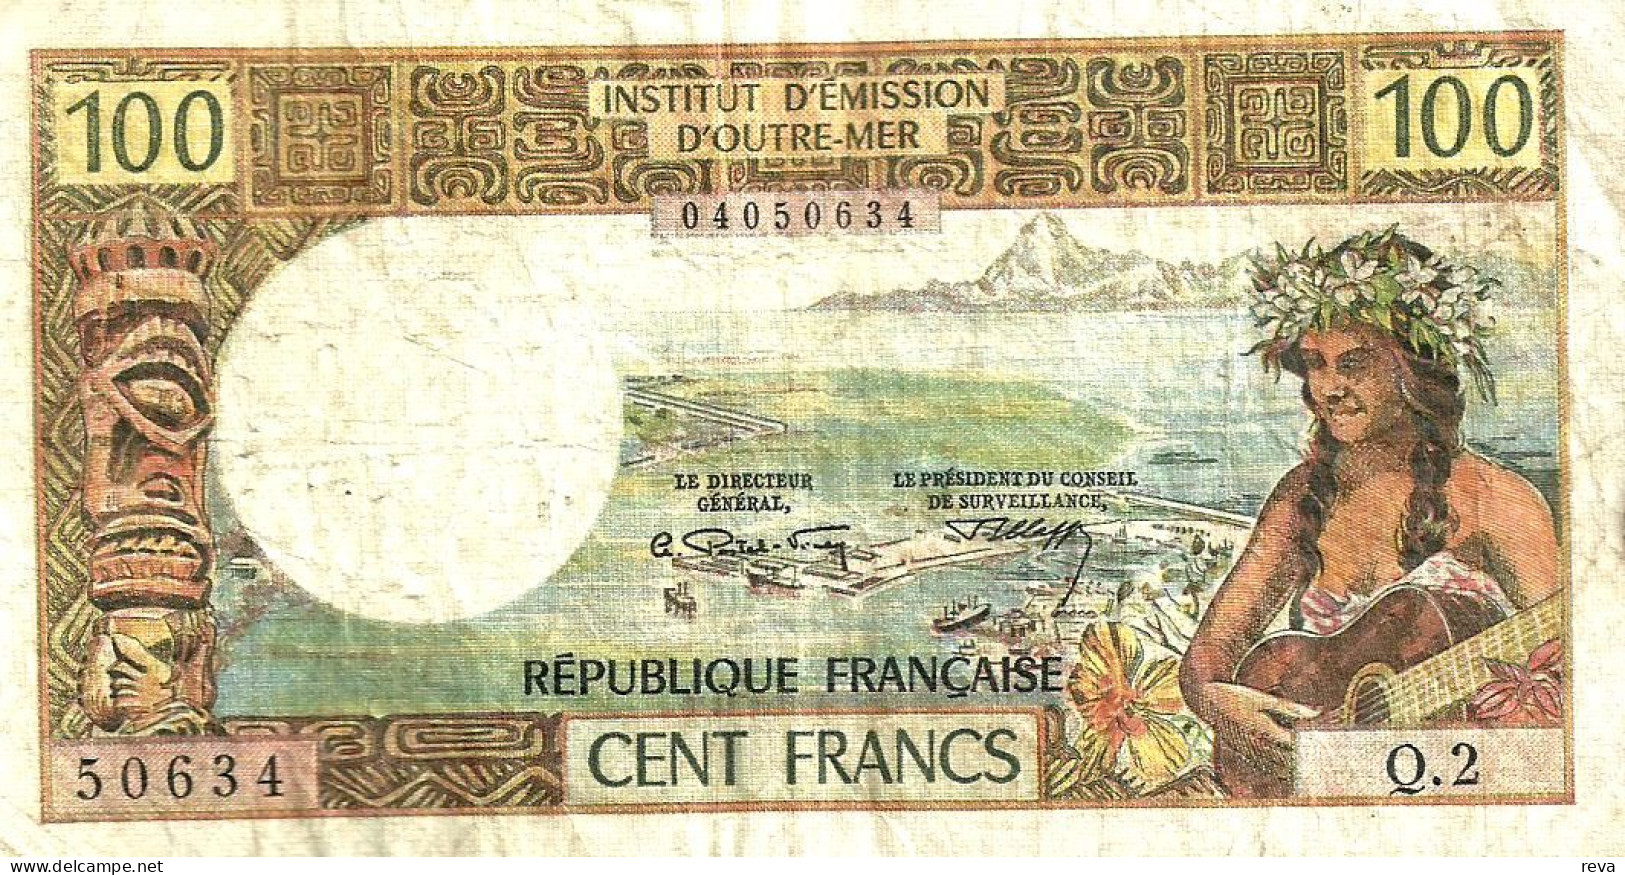 FRENCH POLYNESIA 100 FRANCS BROWN WOMAN FRONT WOMAN HEAD BACK NOT DATED(1971) P24b SIG VARIETY F READ DESCRIPTION!! - Papeete (Frans-Polynesië 1914-1985)